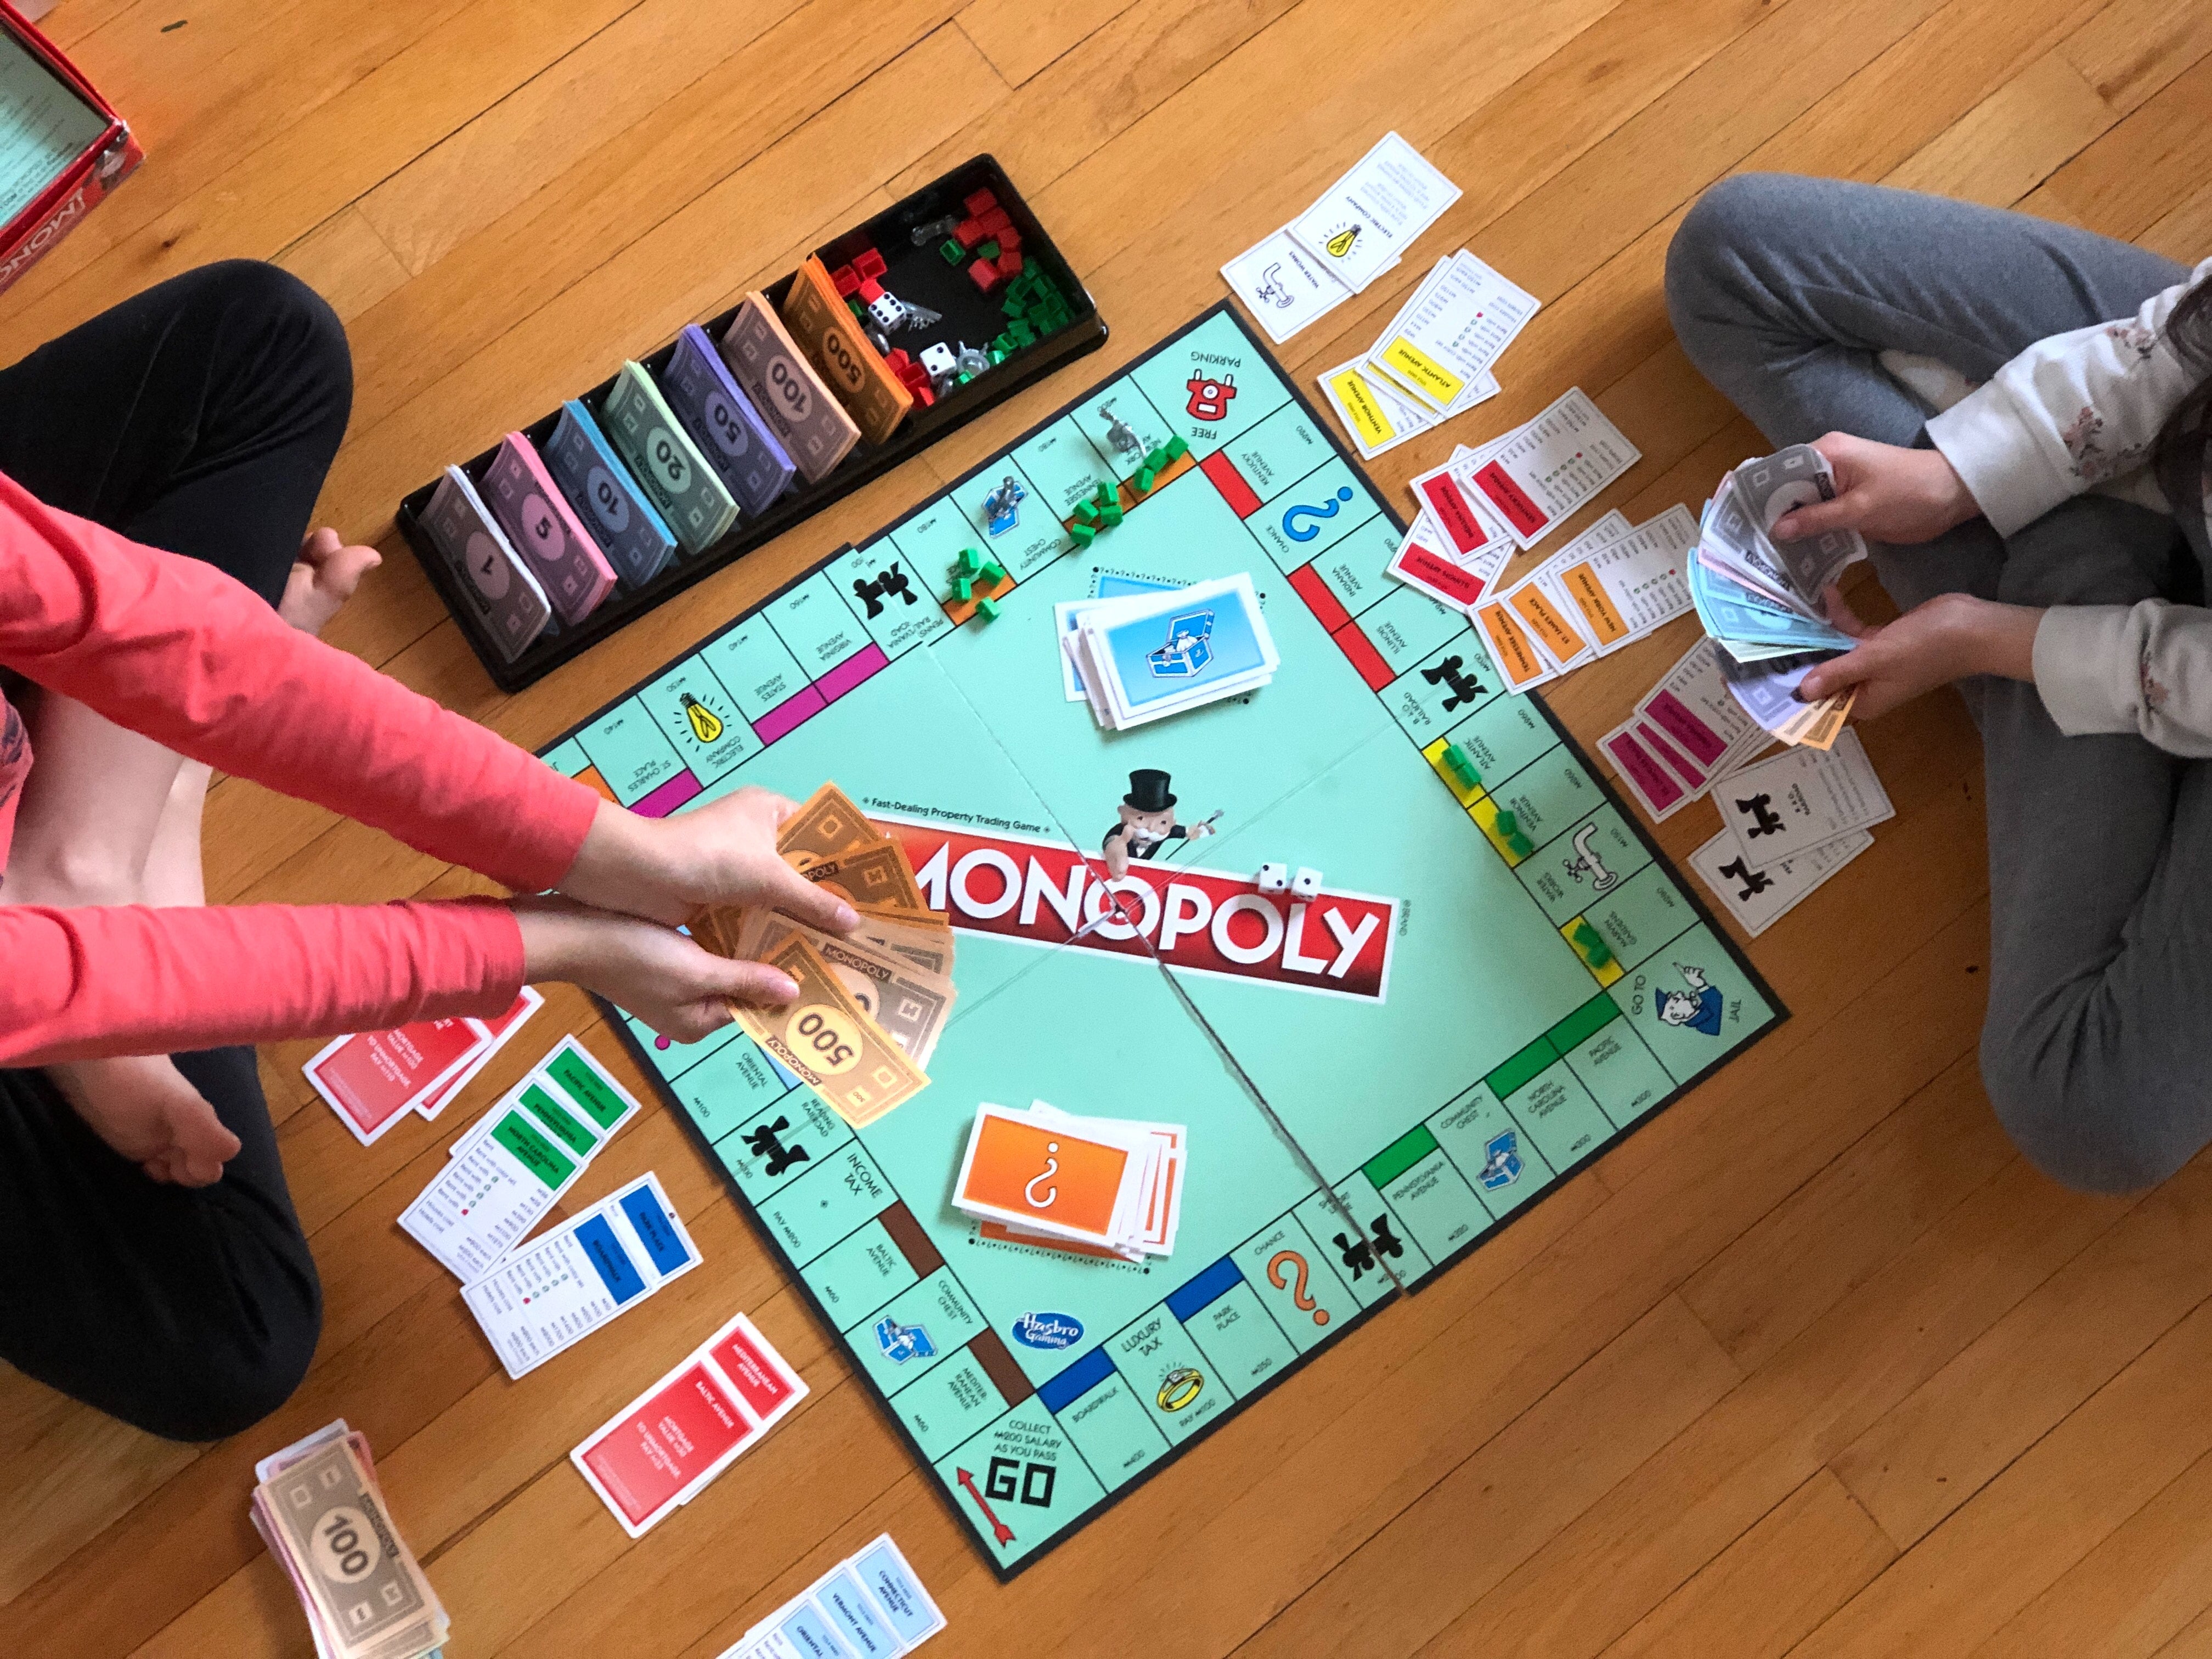 Kid playing monopoly